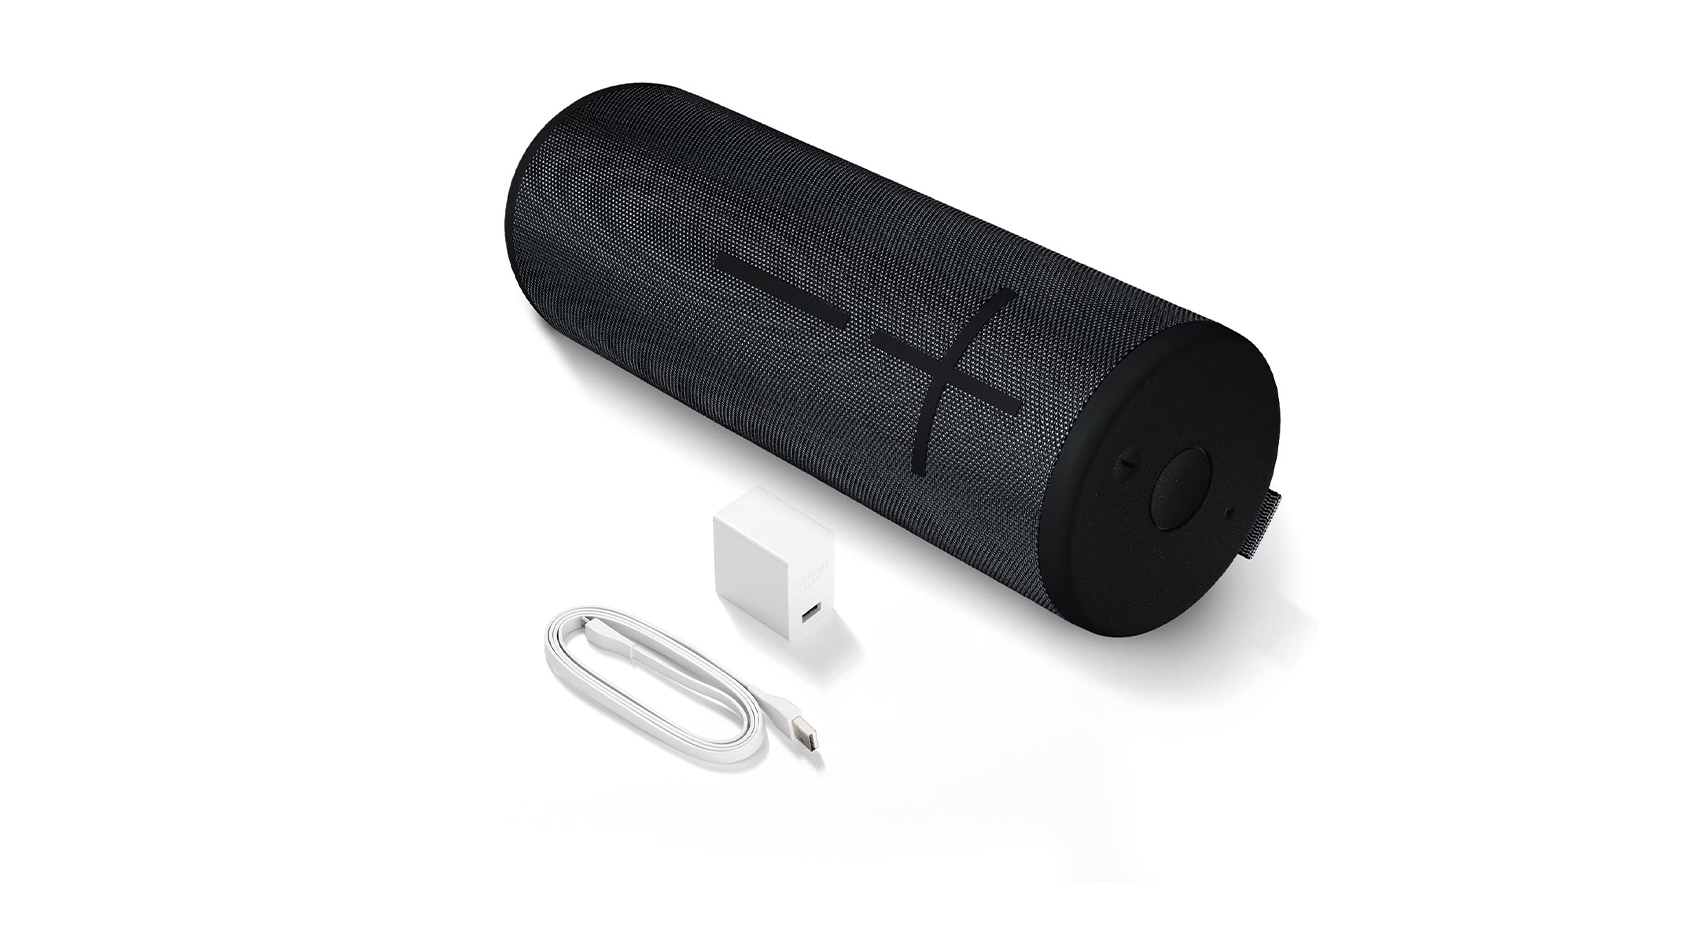 A product render of the UE MEGABOOM 3 waterproof speaker with its inclusions (charging brick and cable).